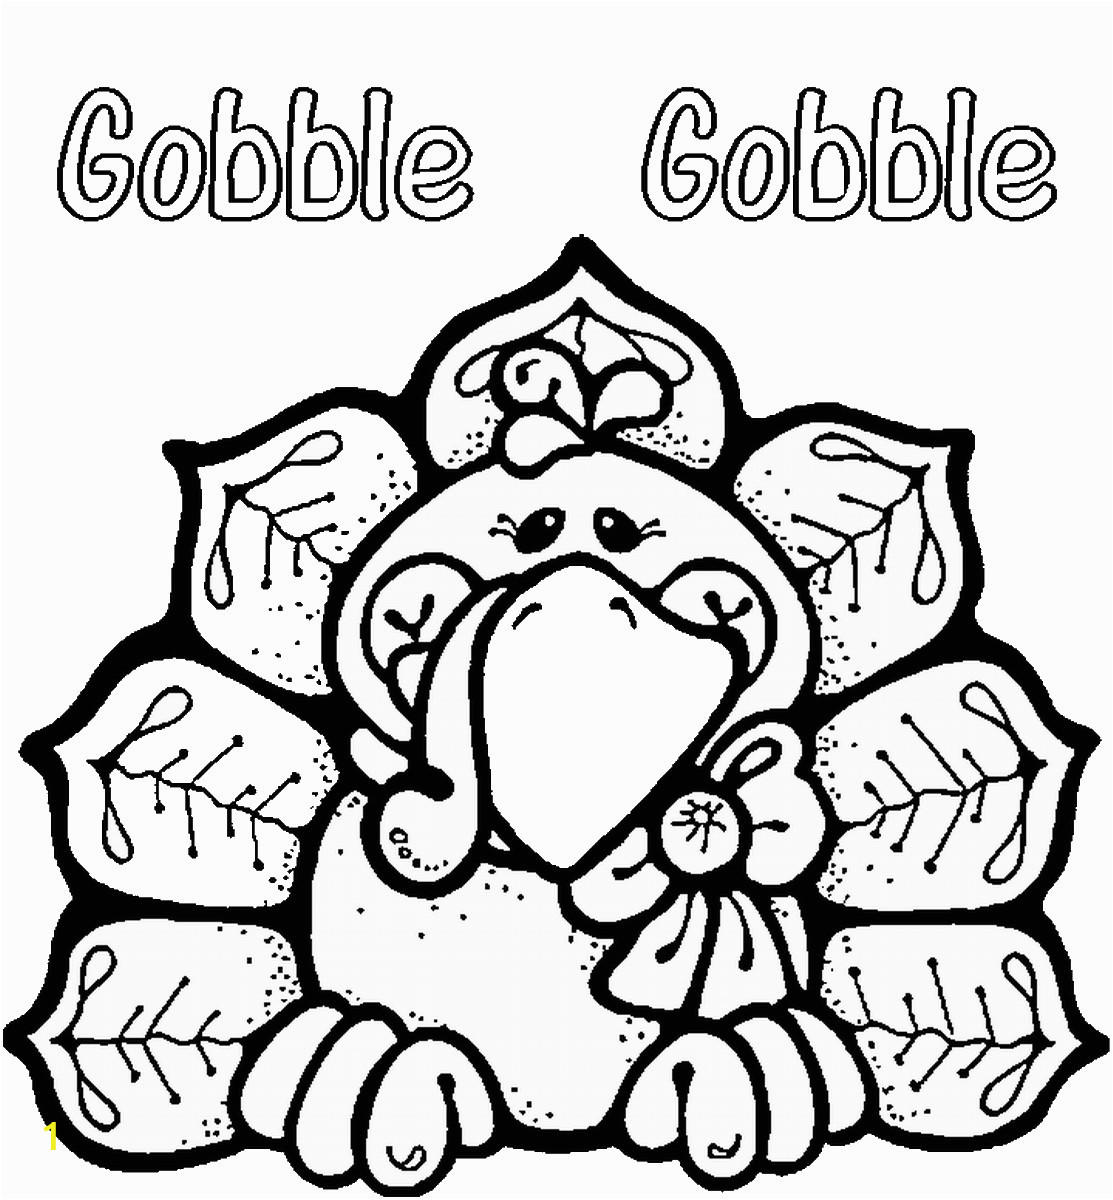 Kids Coloring Pages with Numbers 56 Most Fabulous Printable Thanksgiving Coloring Pages Fresh